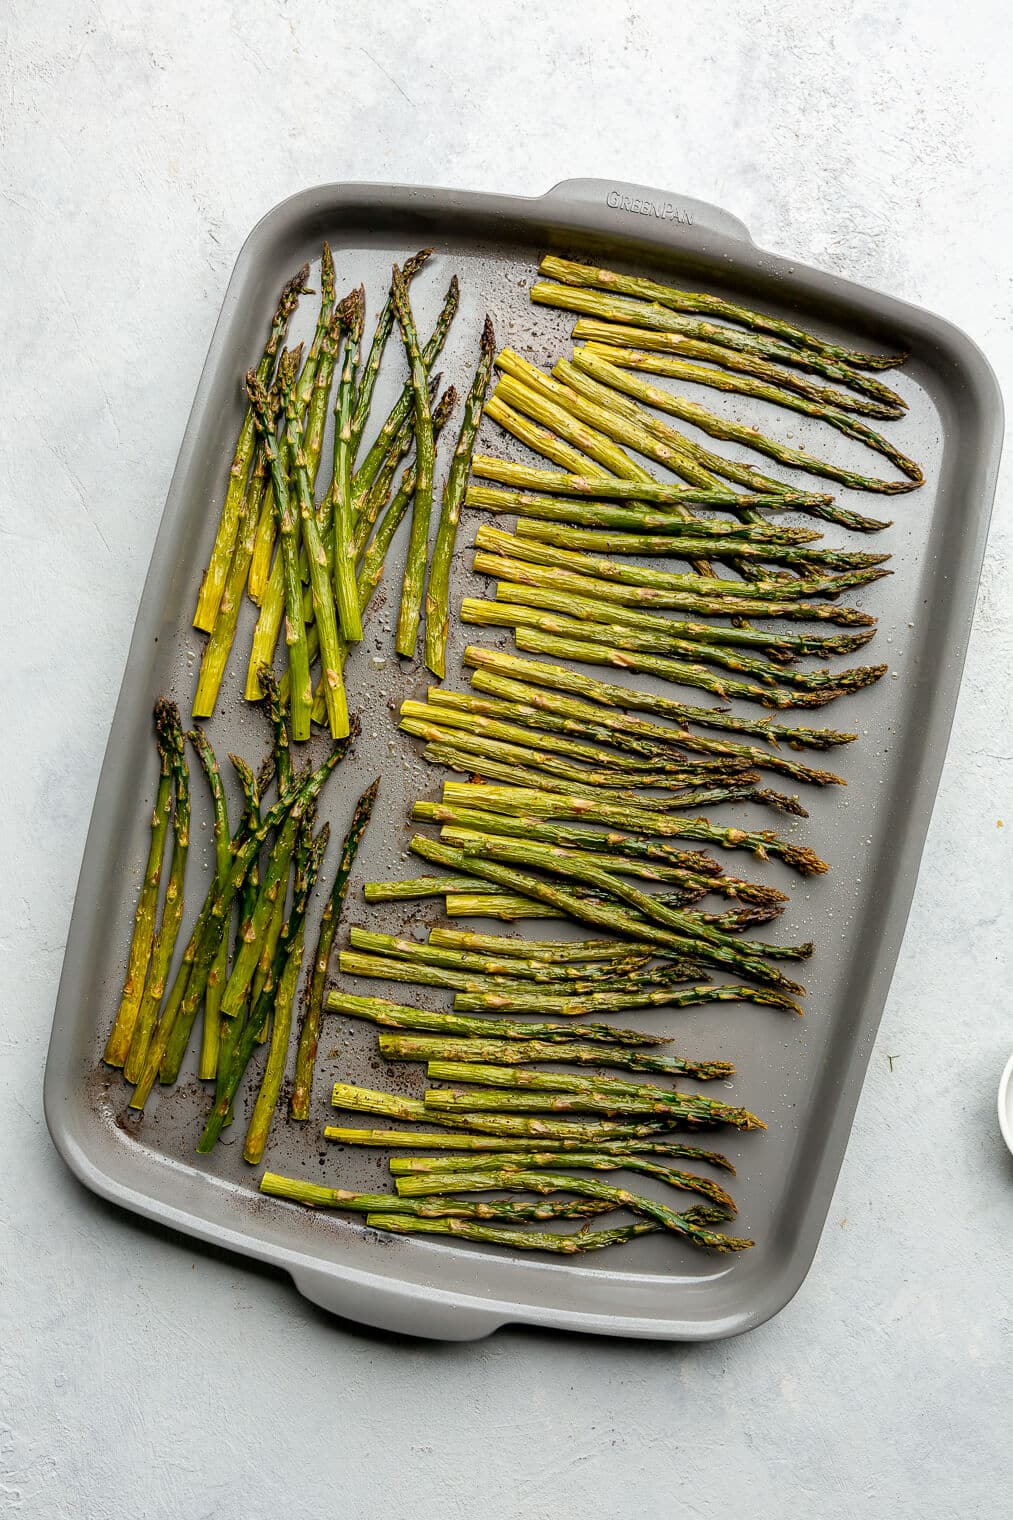 A zoomed out top view of roasted asparagus on a sheet pan.